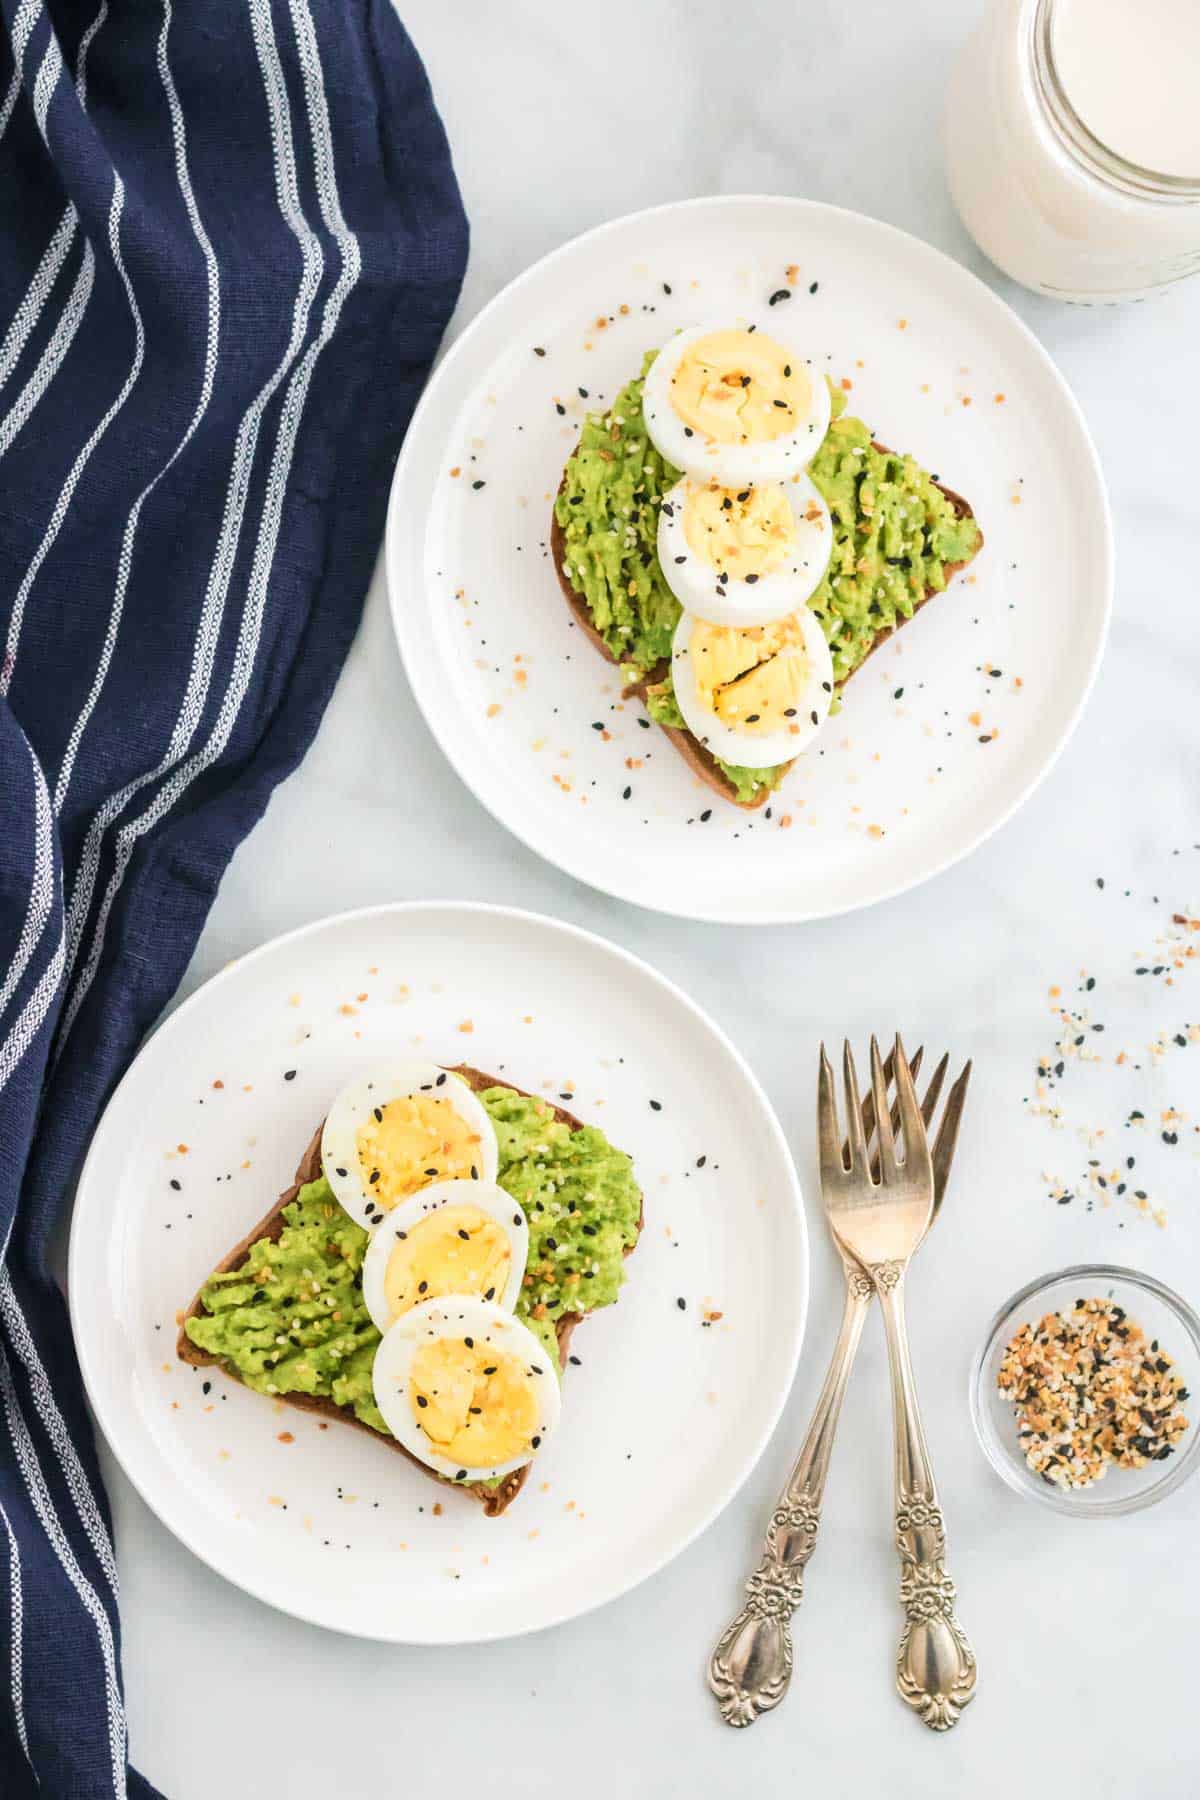 Avocado toasts topped with sliced hard boiled eggs and Everything Bagel seasoning, on two white plates next to two forks.